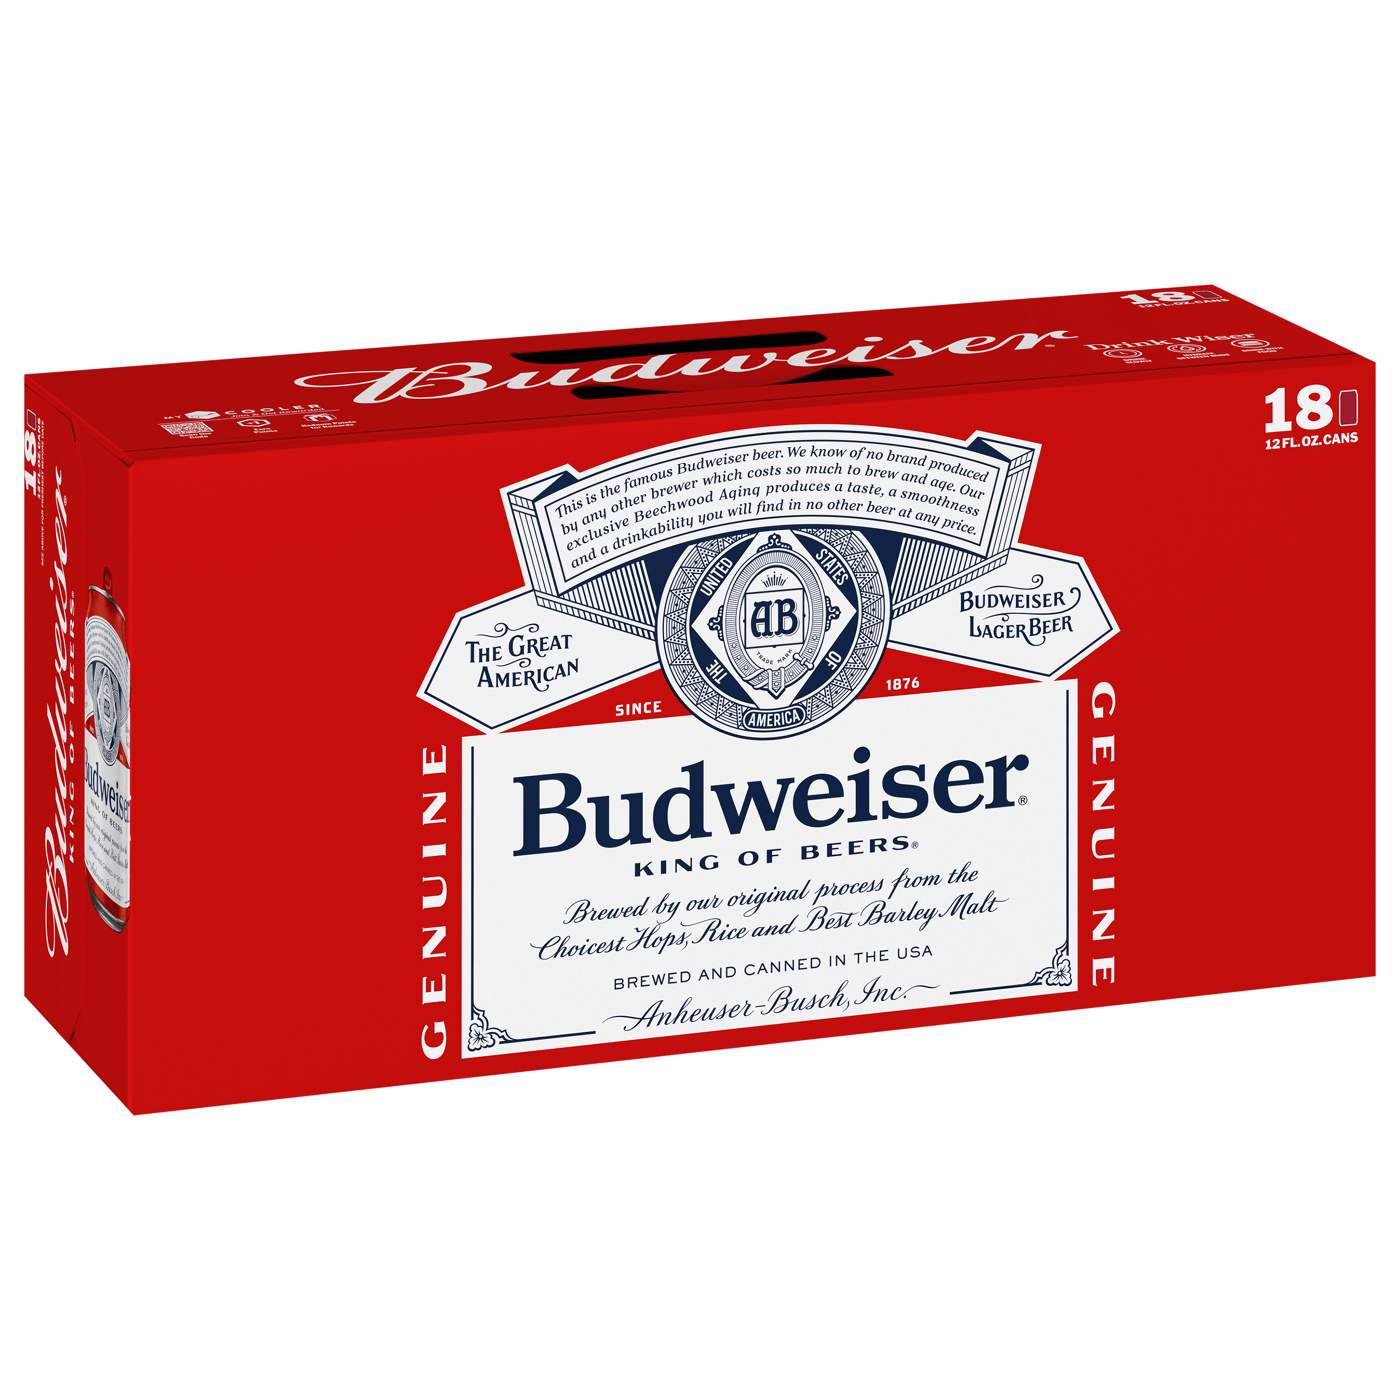 Budweiser Beer 18 pk Cans; image 1 of 2